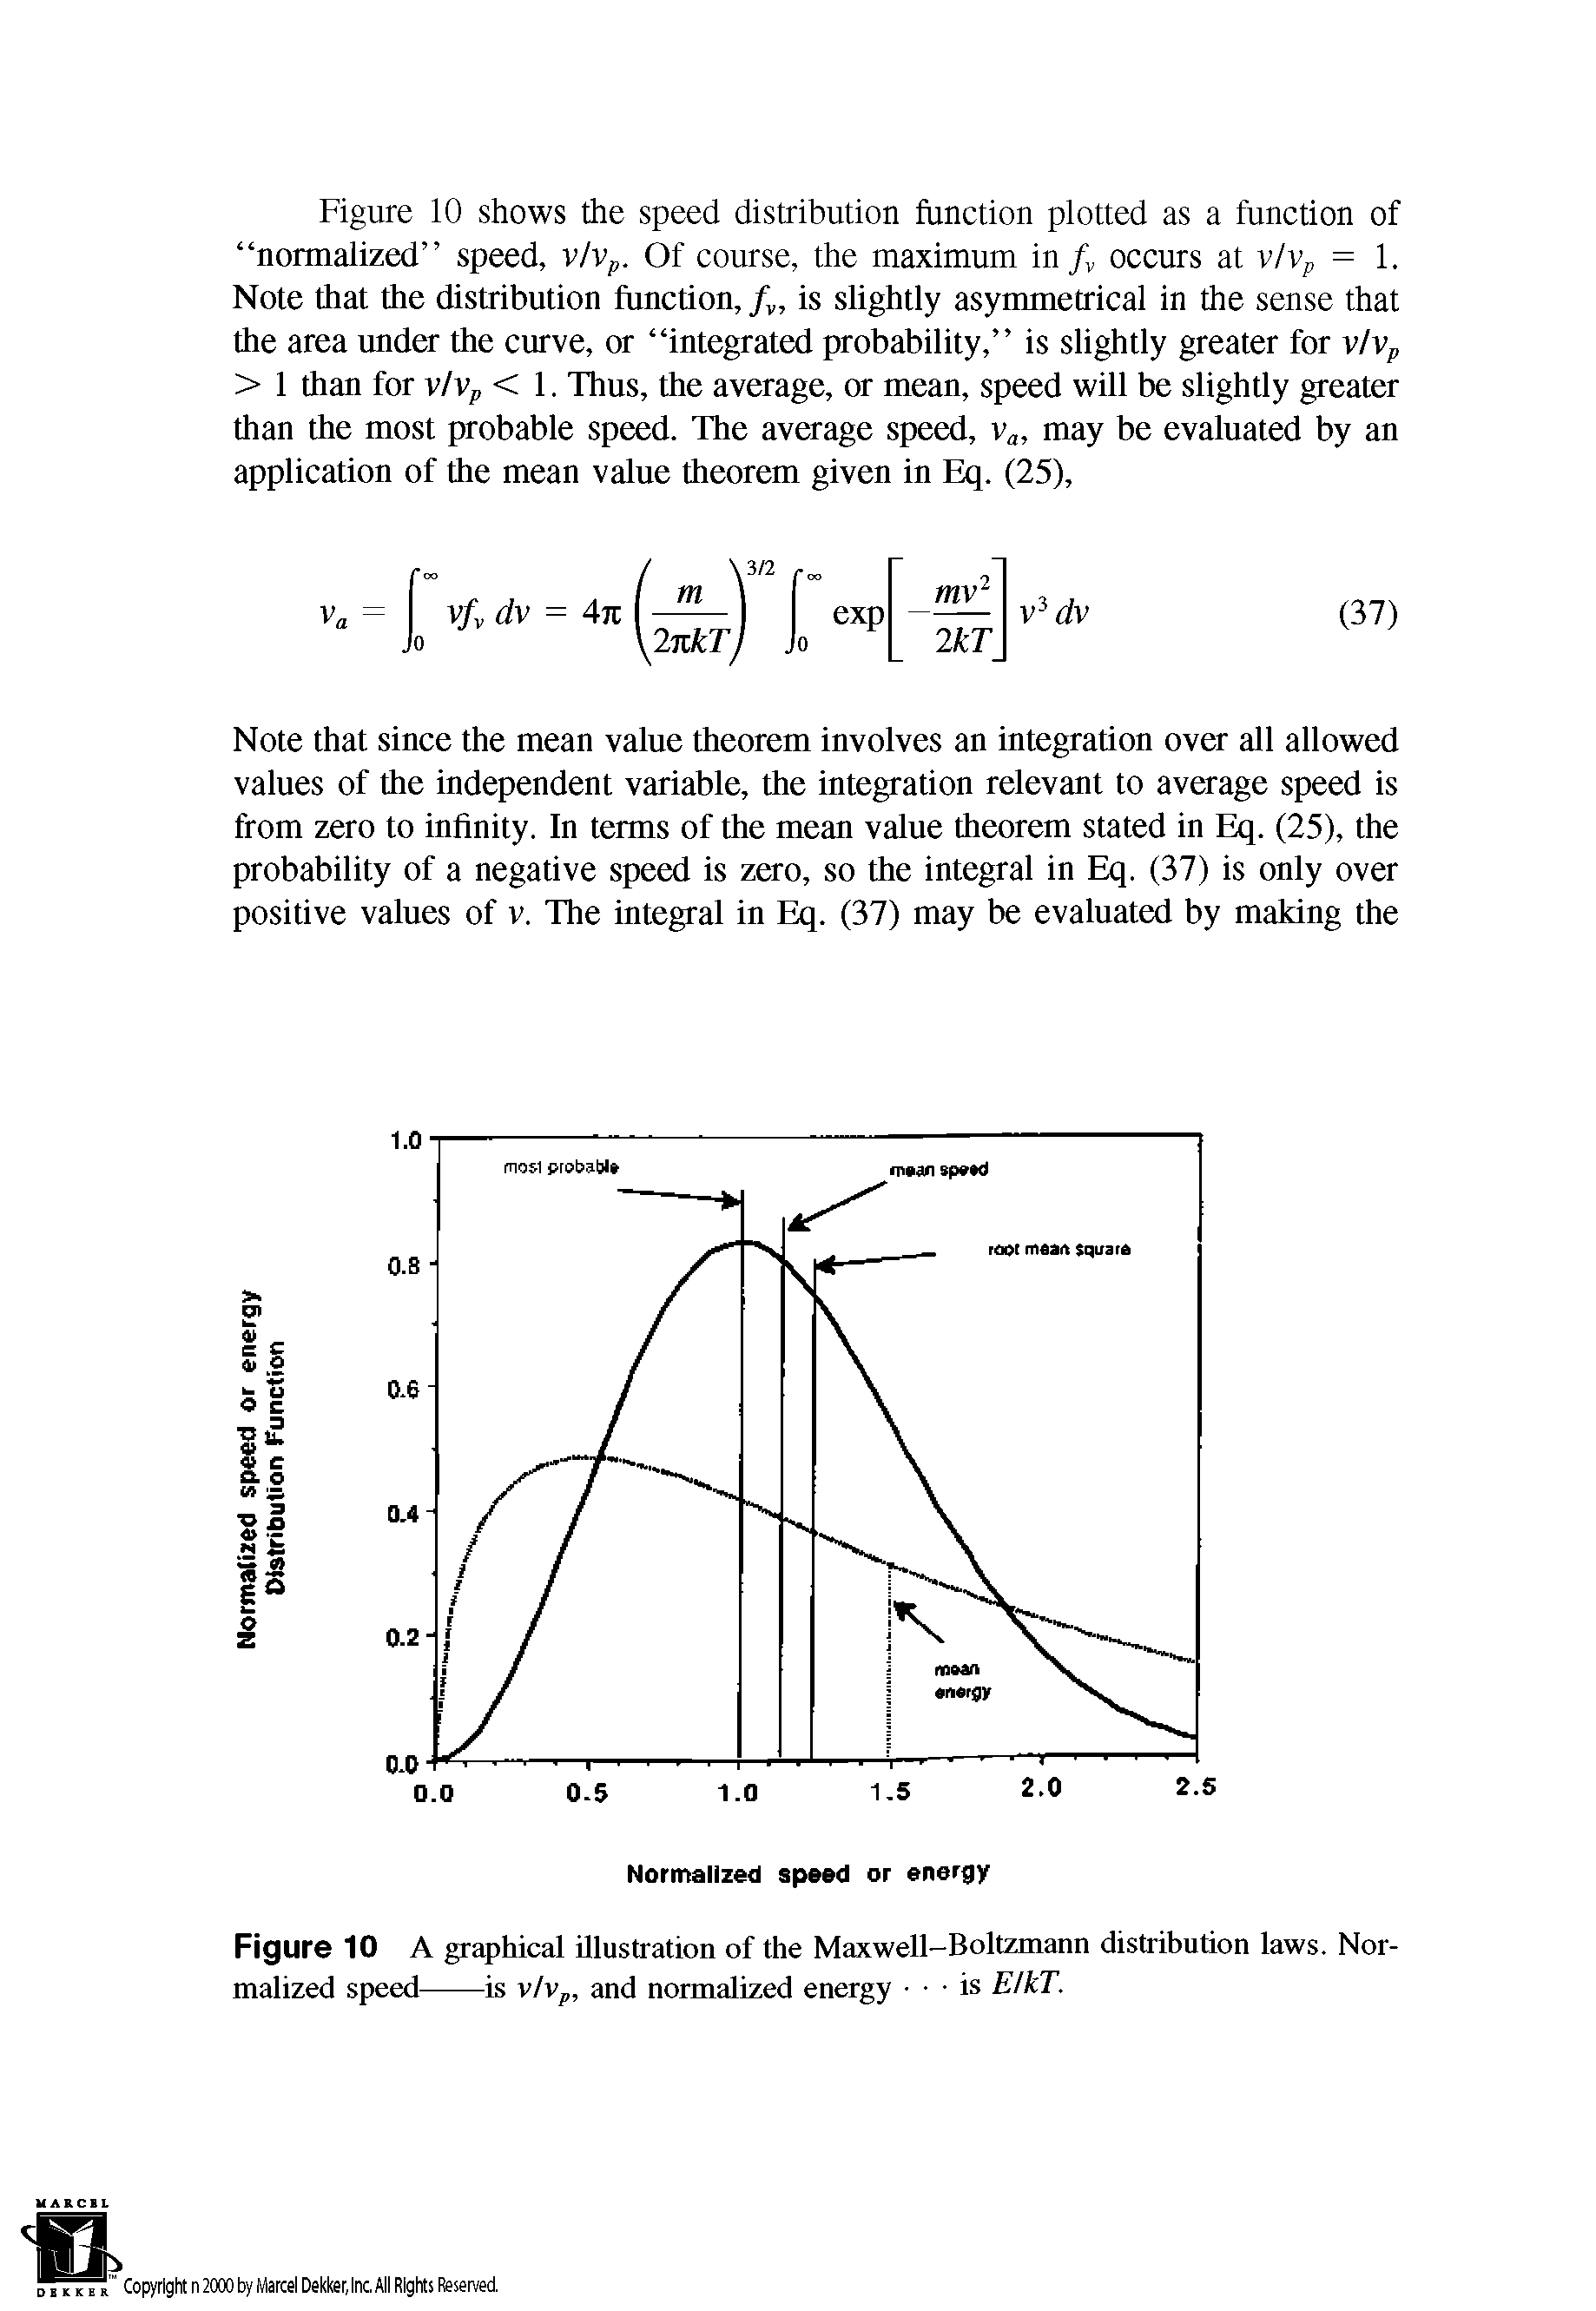 Figure 10 A graphical illustration of the Maxwell-Boltzmann distribution laws. Normalized speed---is vlvp, and normalized energy - is EUcT.